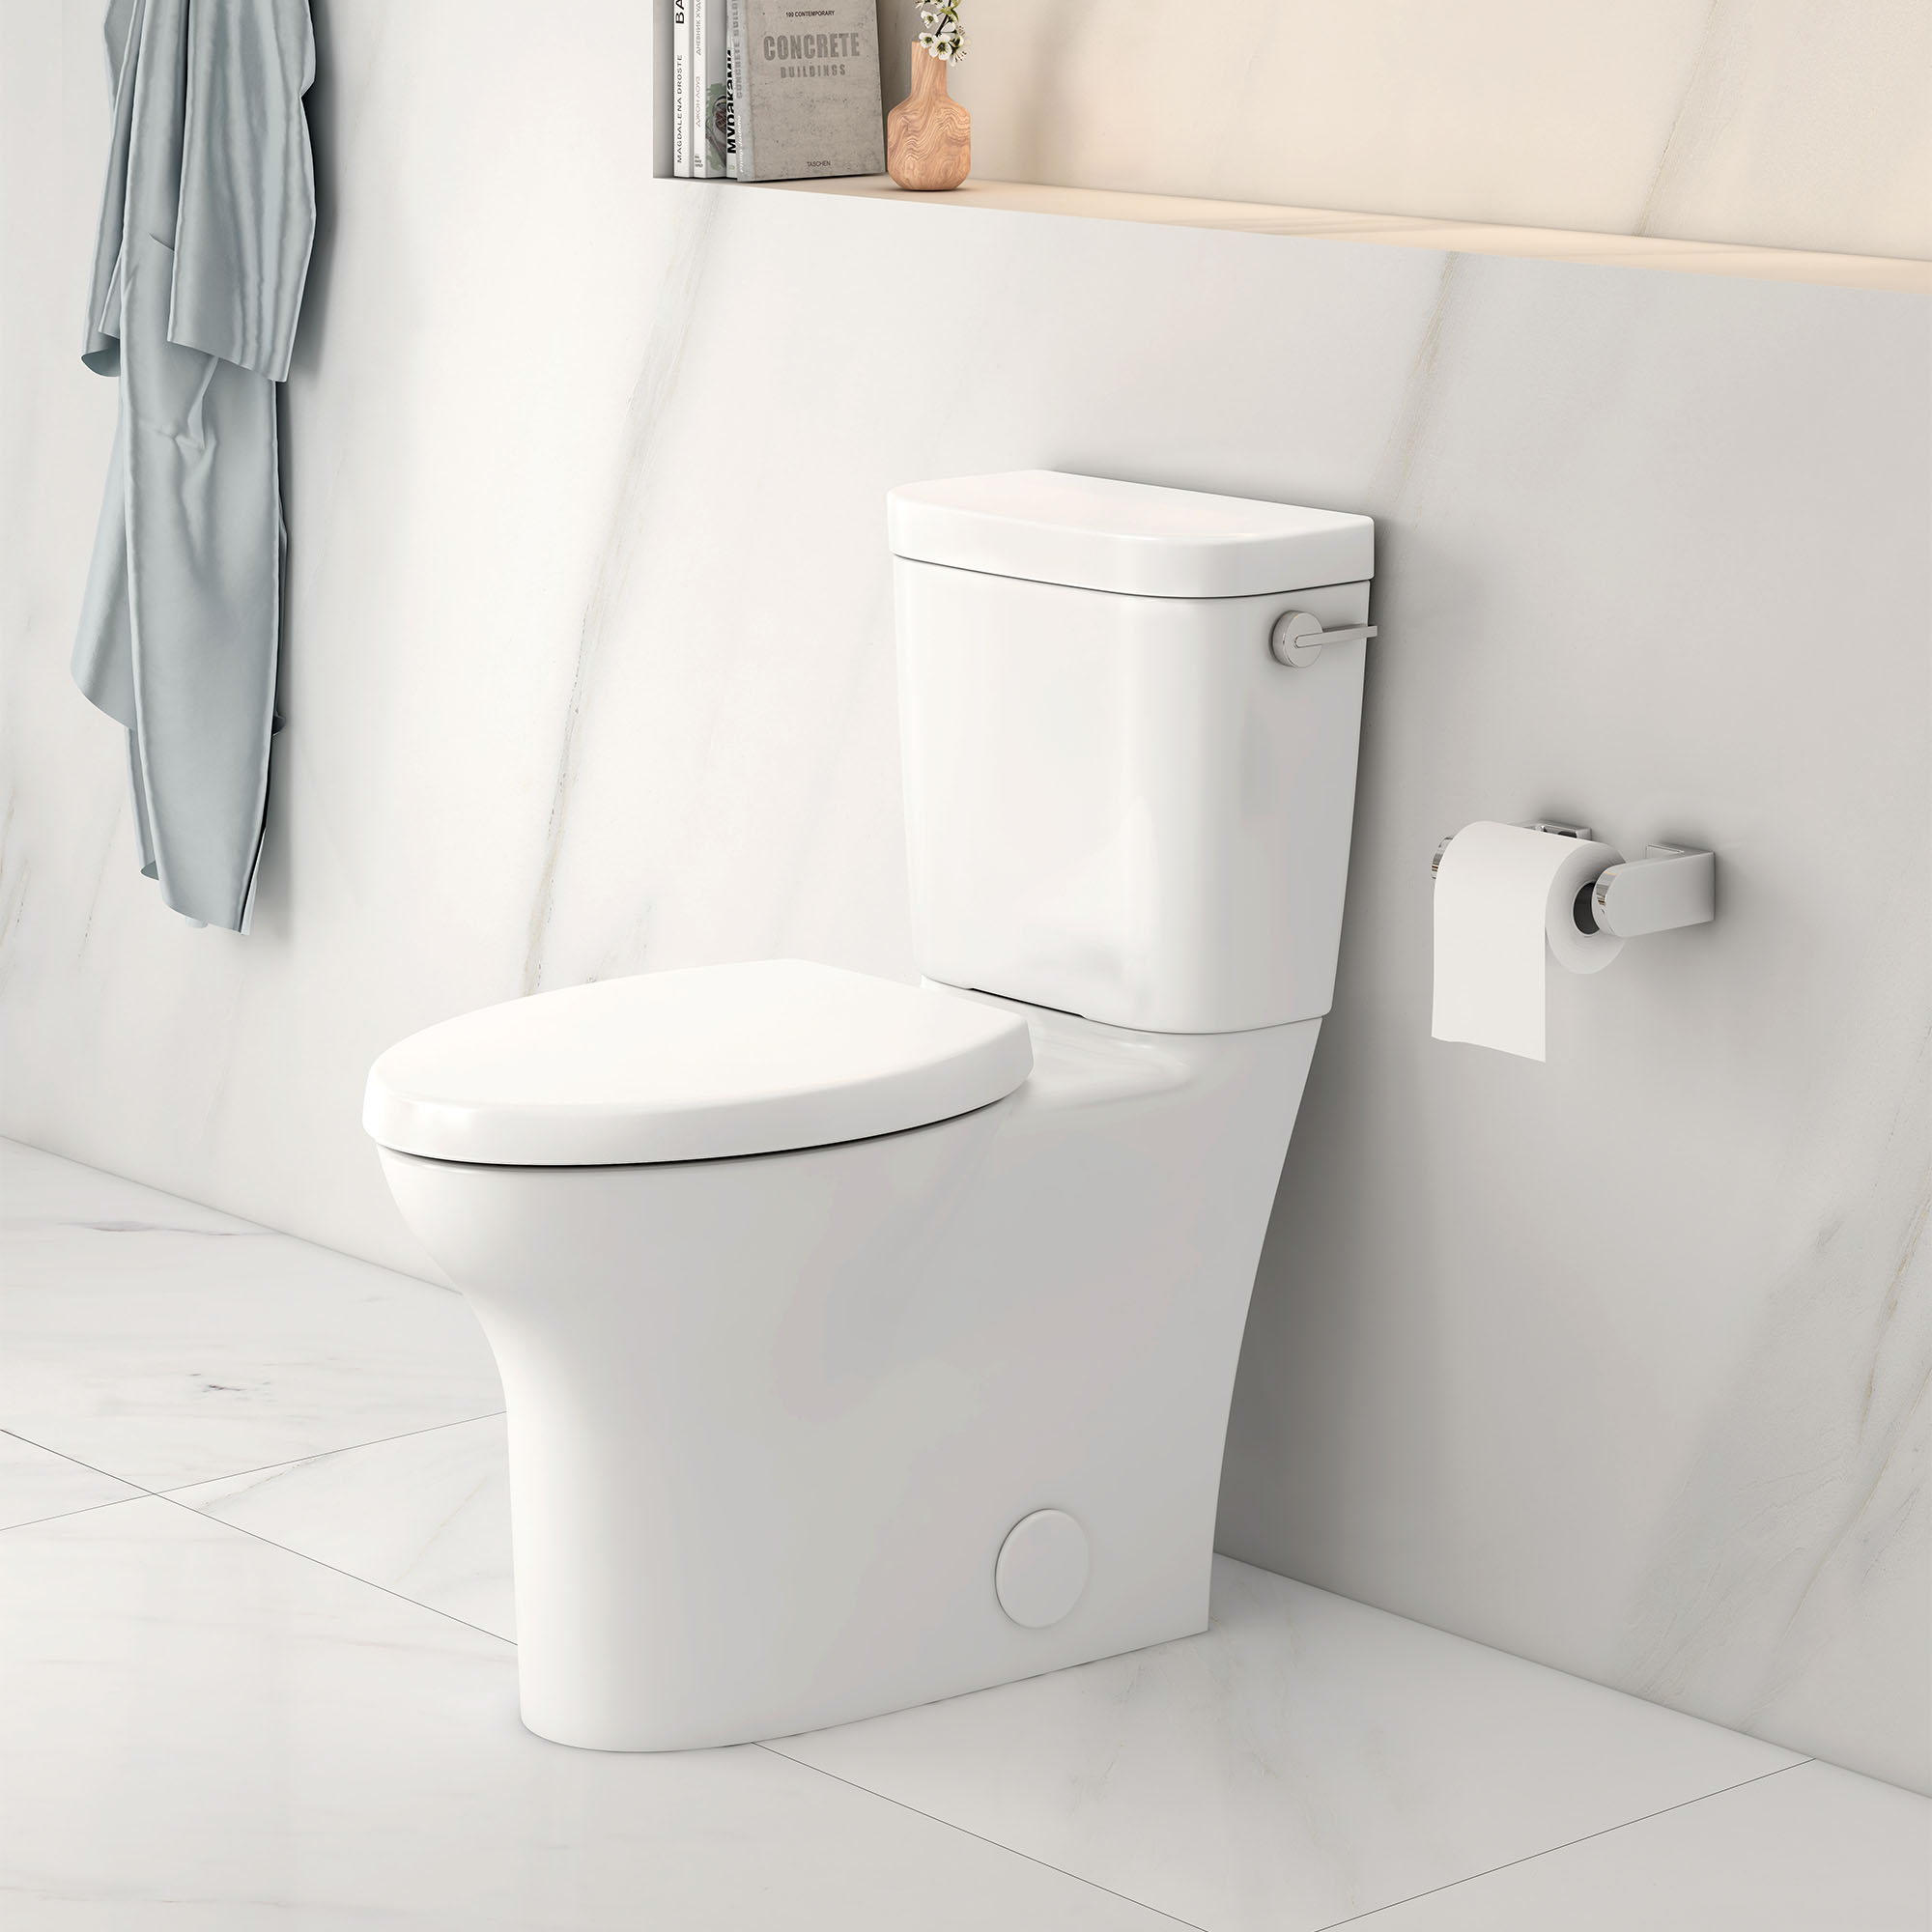 Equility® Two-Piece Chair-Height Right-Hand Trip Lever Elongated Toilet with Seat